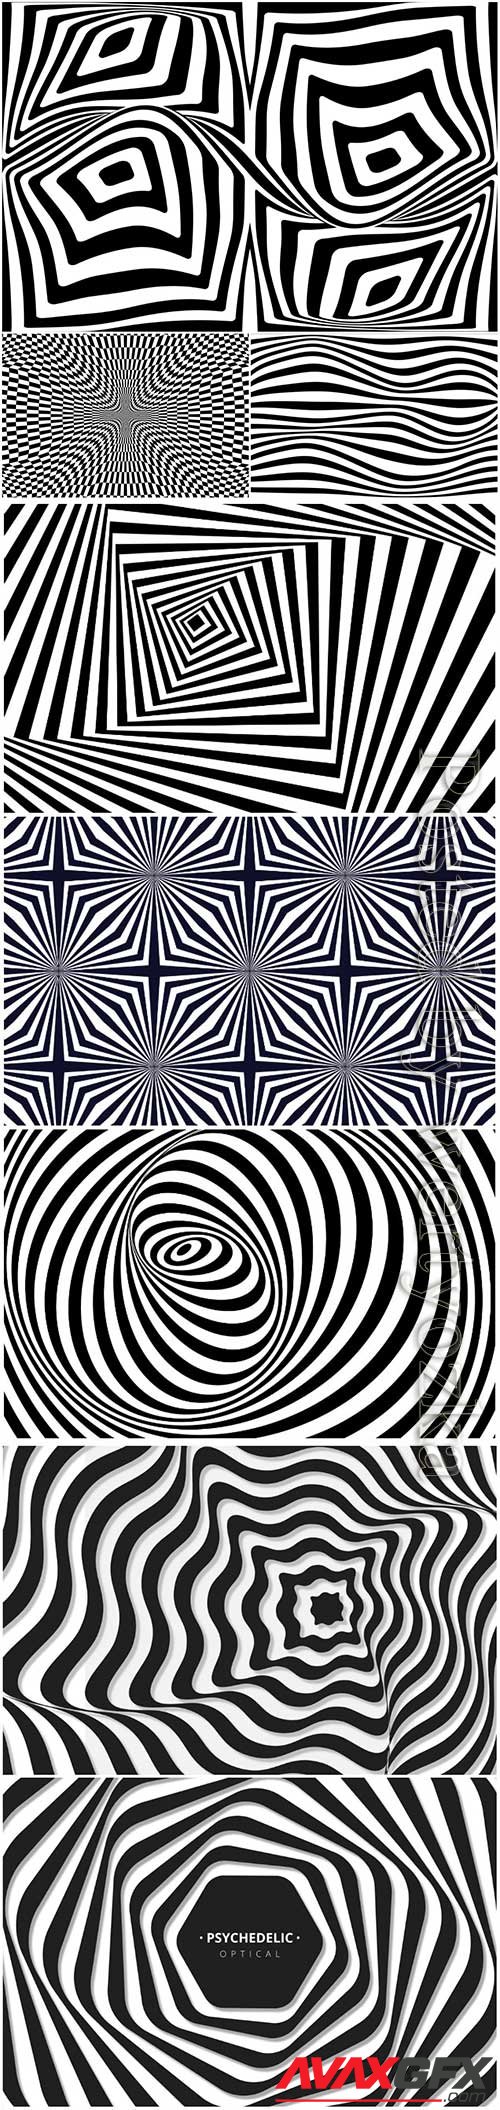 Psychedelic optical illusion vector backgroun